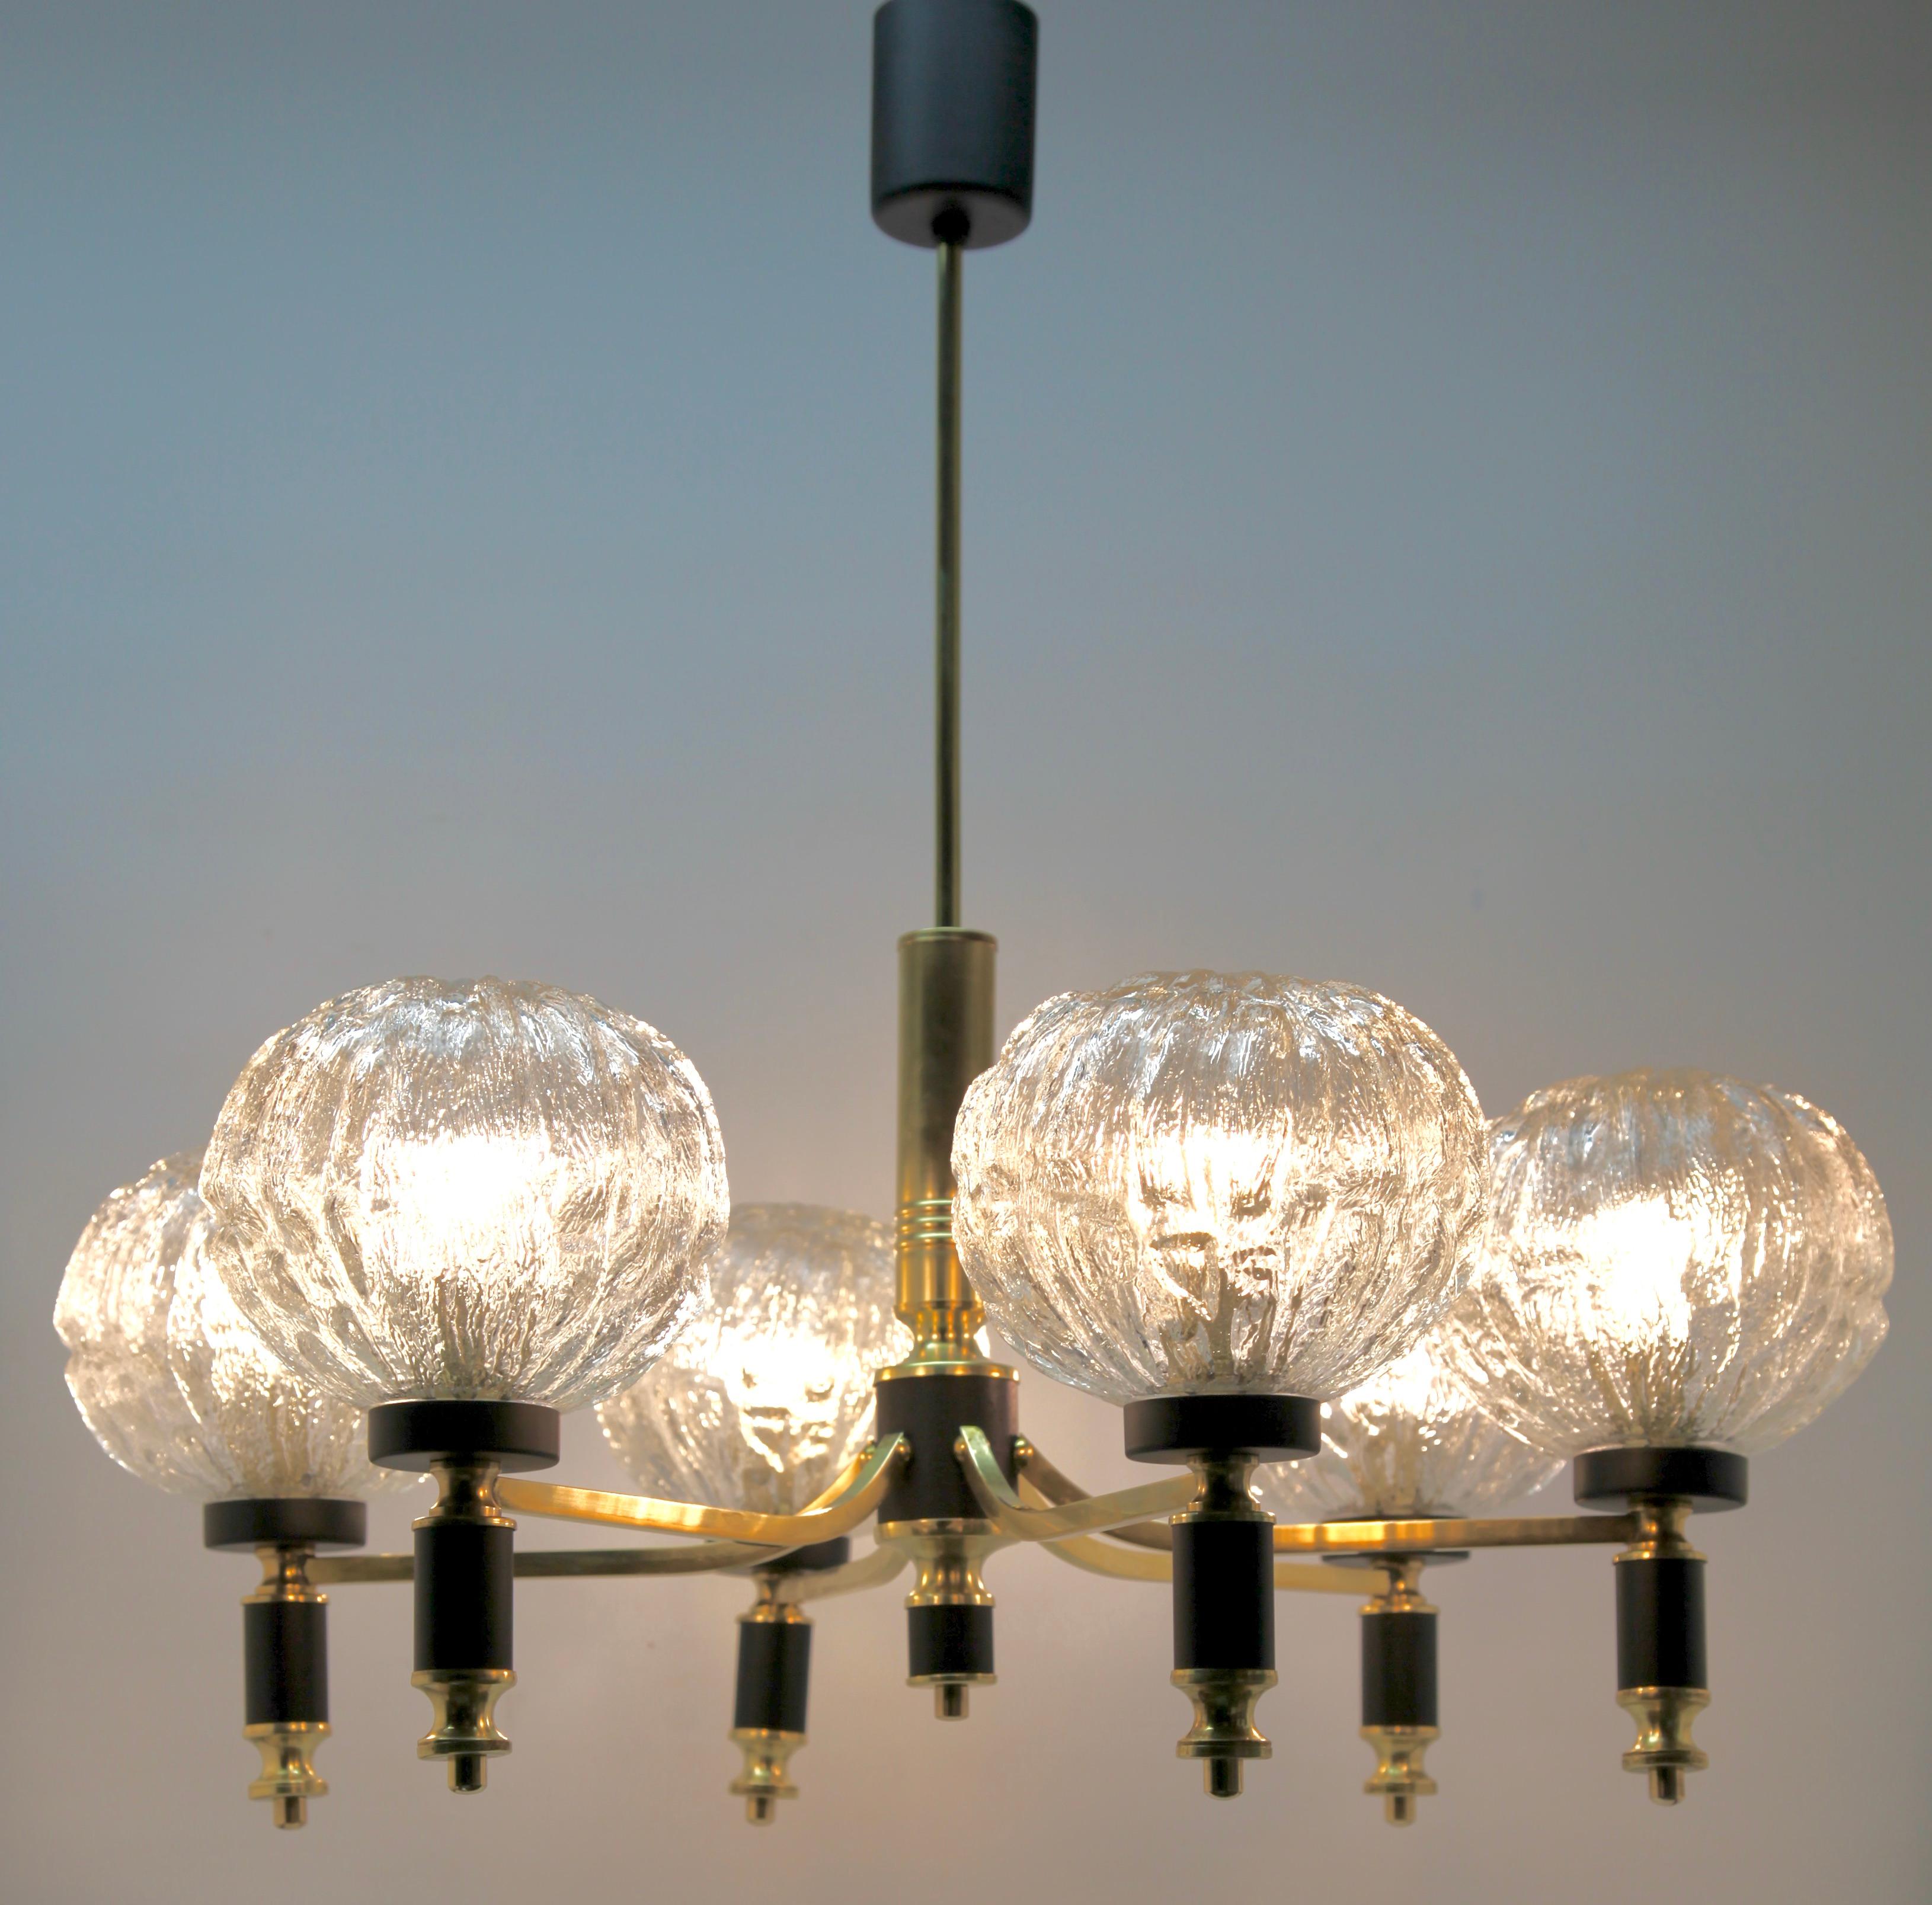 Mid-Century Modern Vintage Chandelier in the Style of Stilnovo 6 Arms, Italian, 1960s